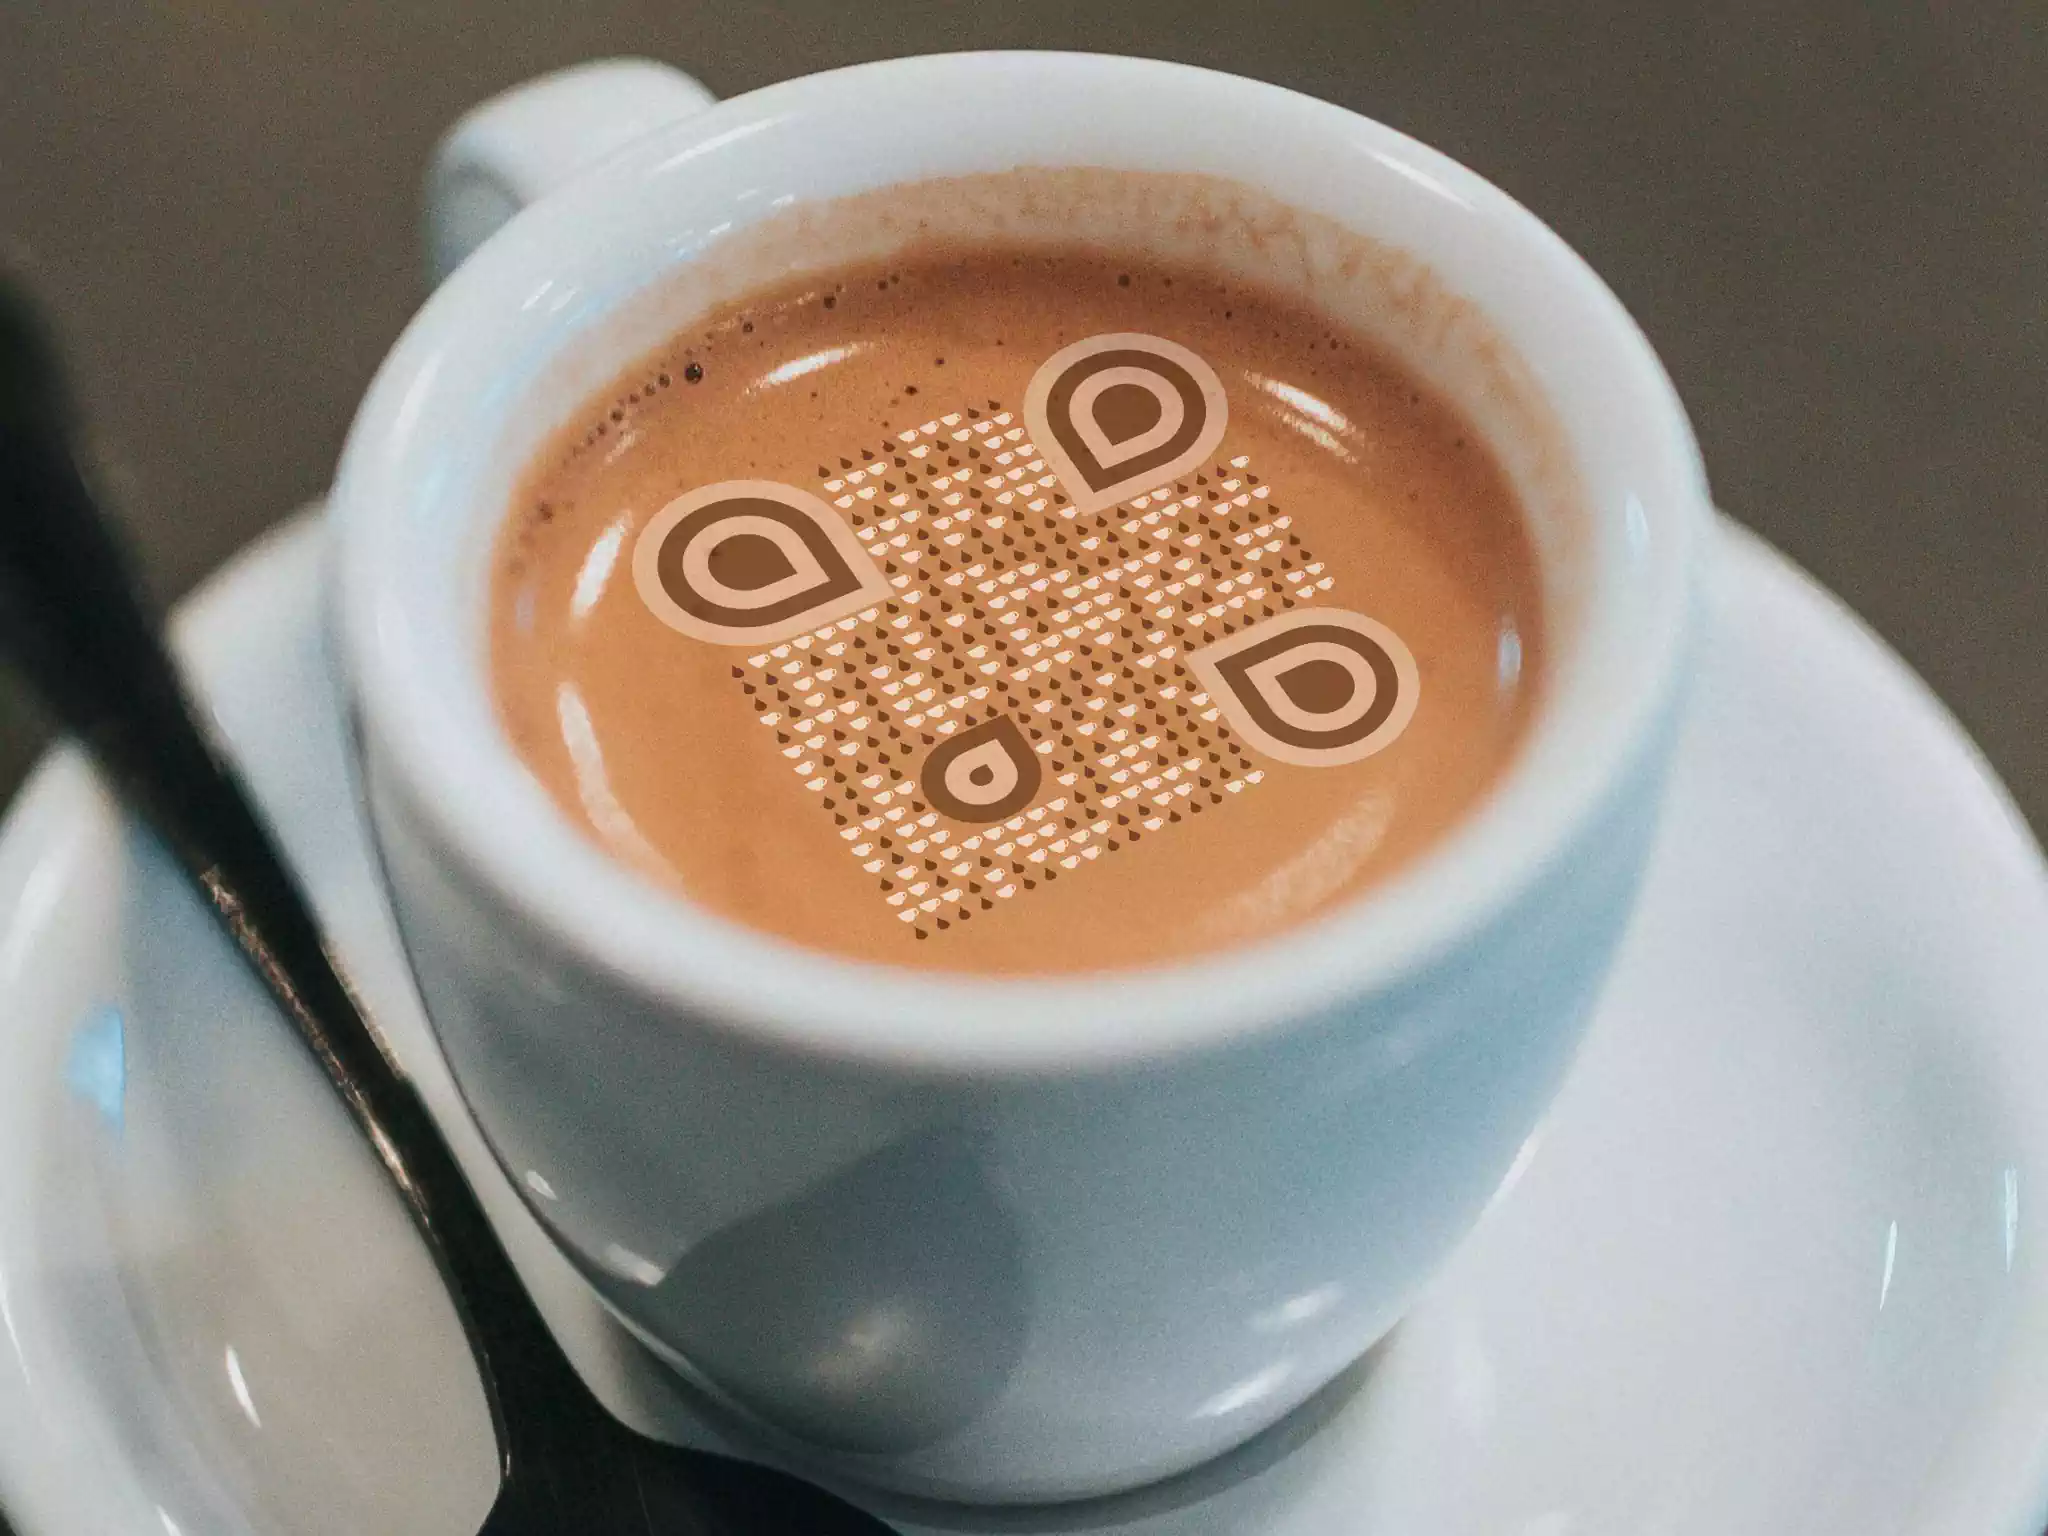 QRcodeLab qr generator and image editor - image with 3D qr code like printed on coffee foam